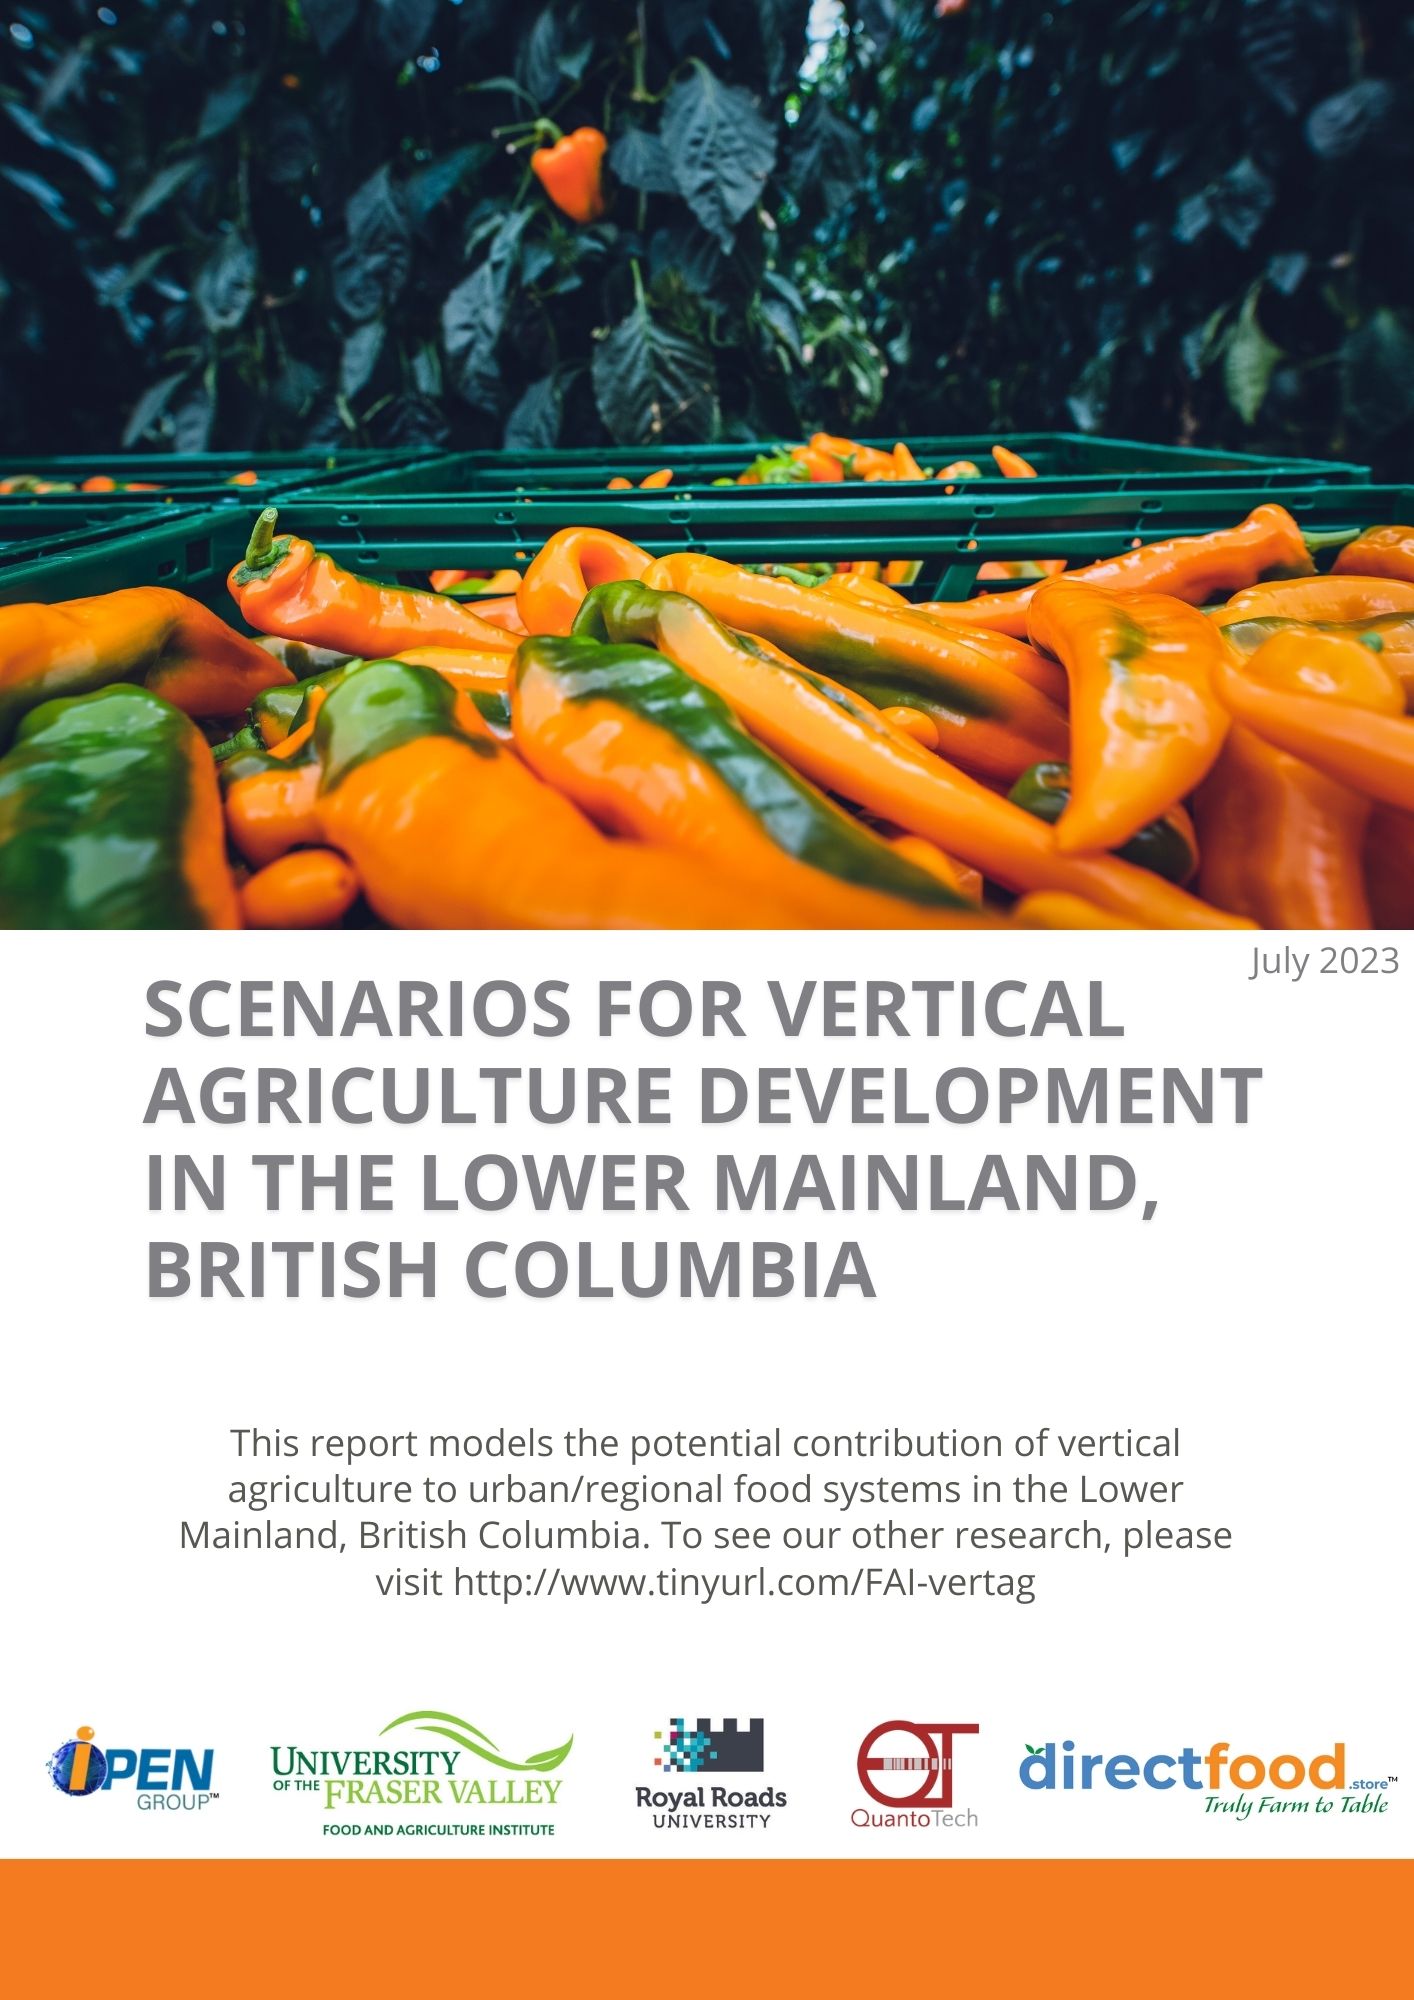 Scenarios for vertical agriculture development in the Lower Mainland, British Columbia